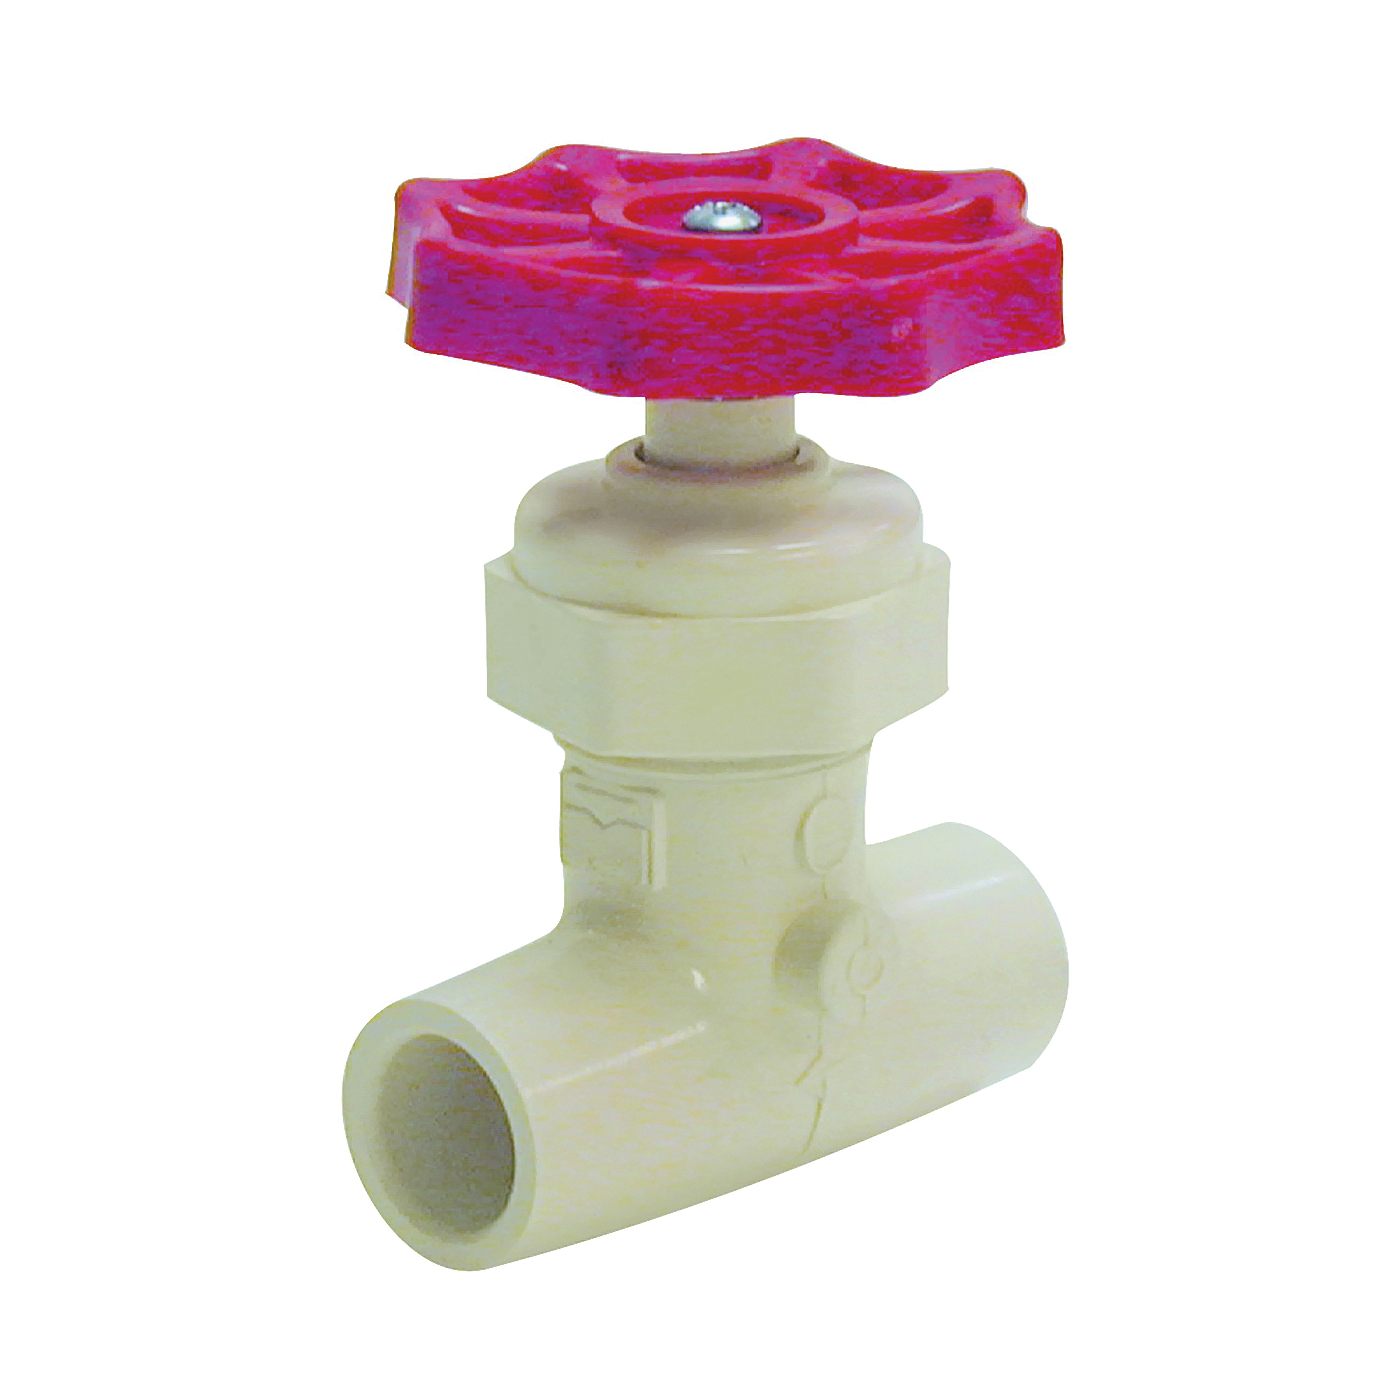 B & K 105-223 Stop Valve, 1/2 in Connection, Solvent Weld, 100 psi Pressure, CPVC Body